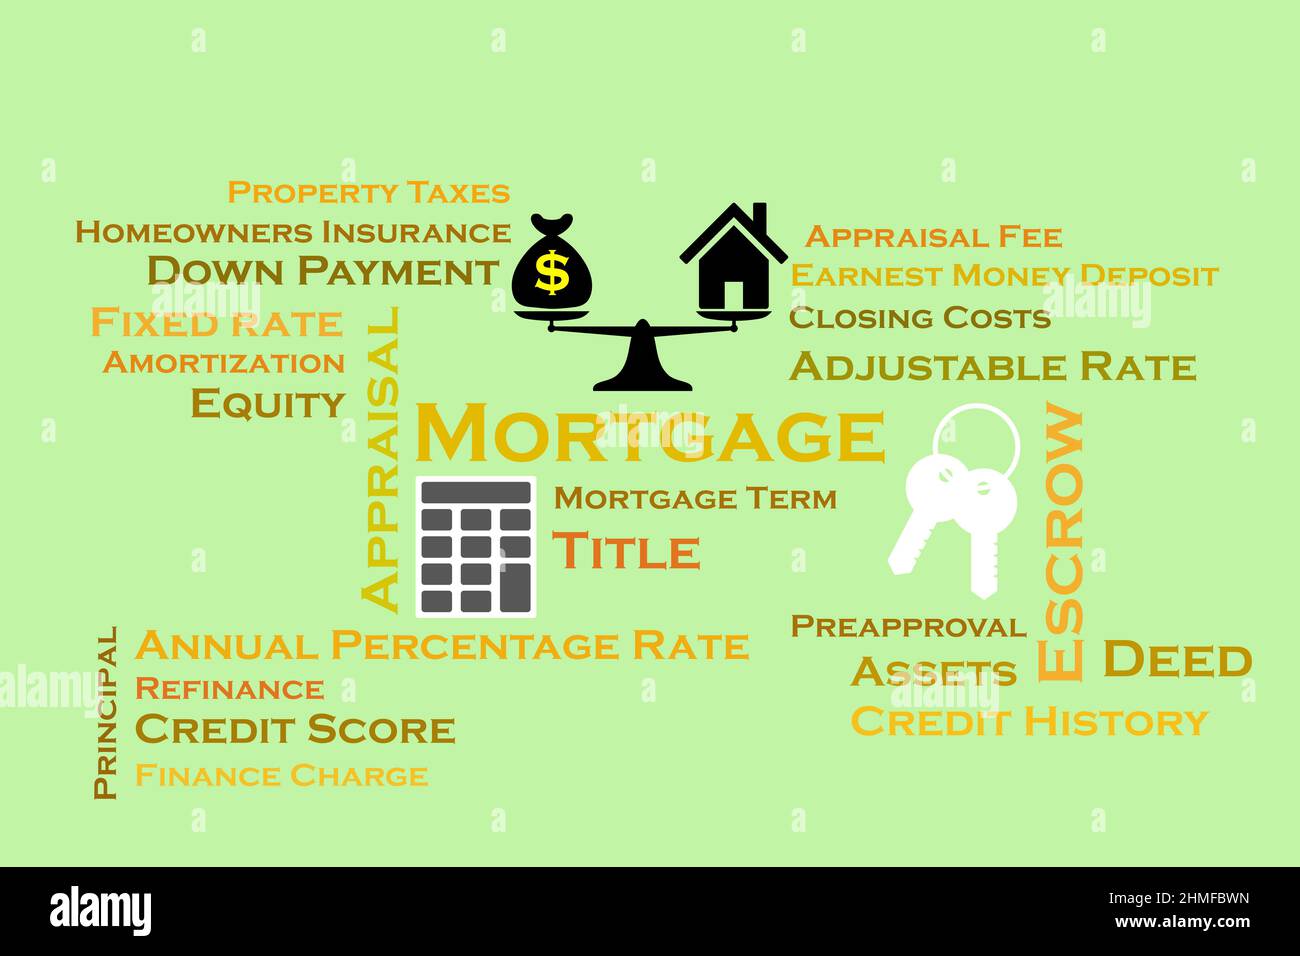 Mortgage. Overview of key related terms and illustrative images. Stock Photo